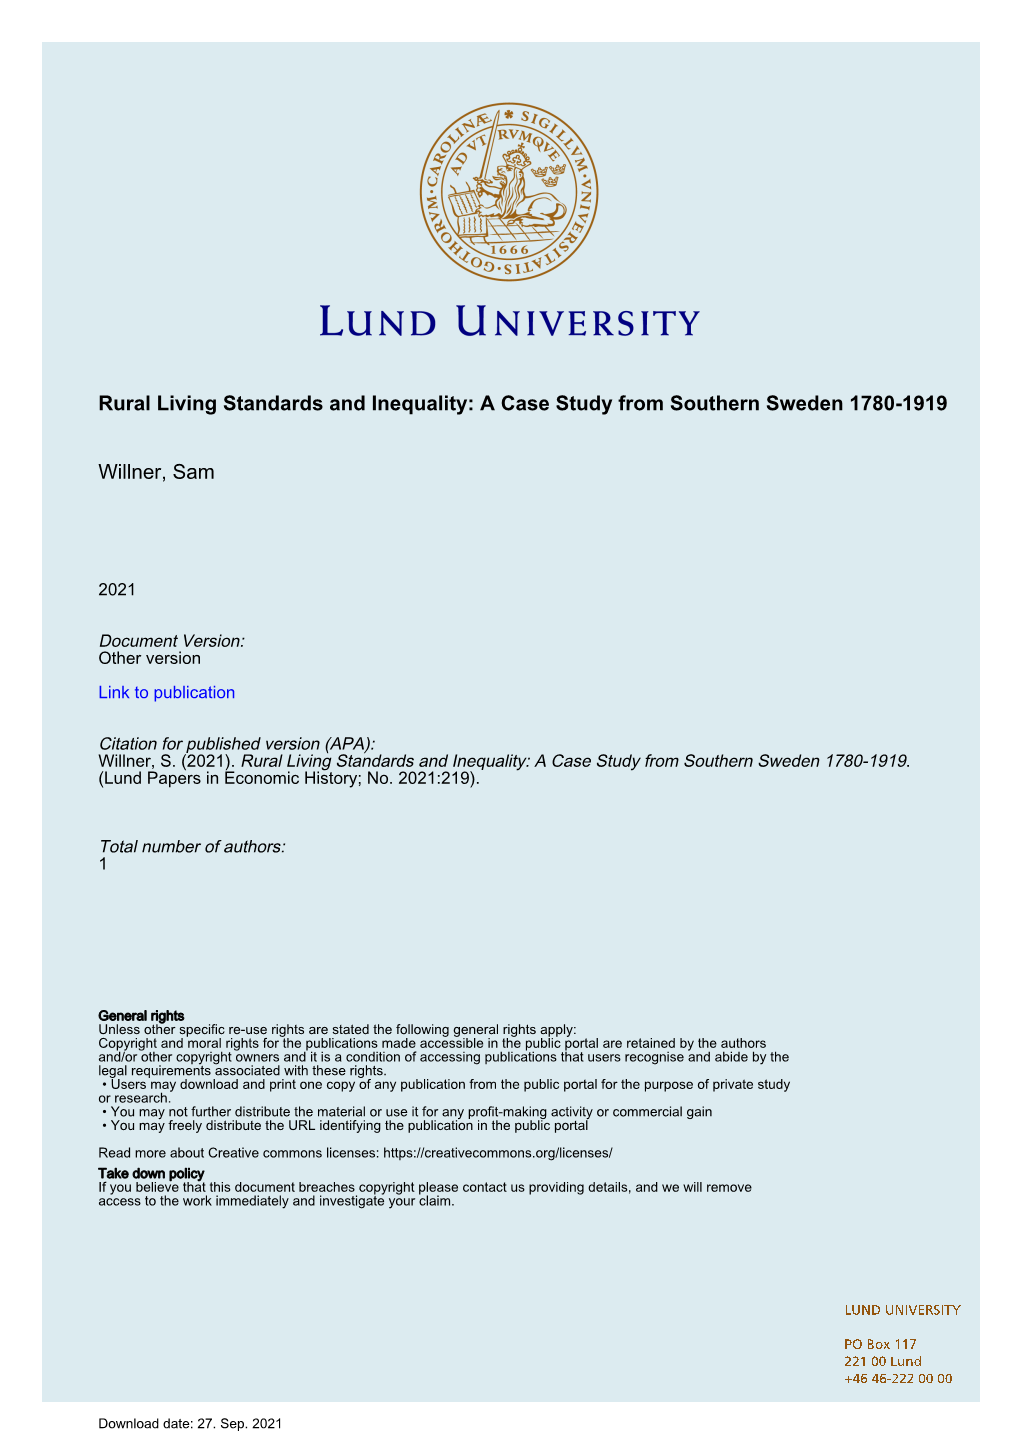 Rural Living Standards and Inequality: a Case Study from Southern Sweden 1780-1919